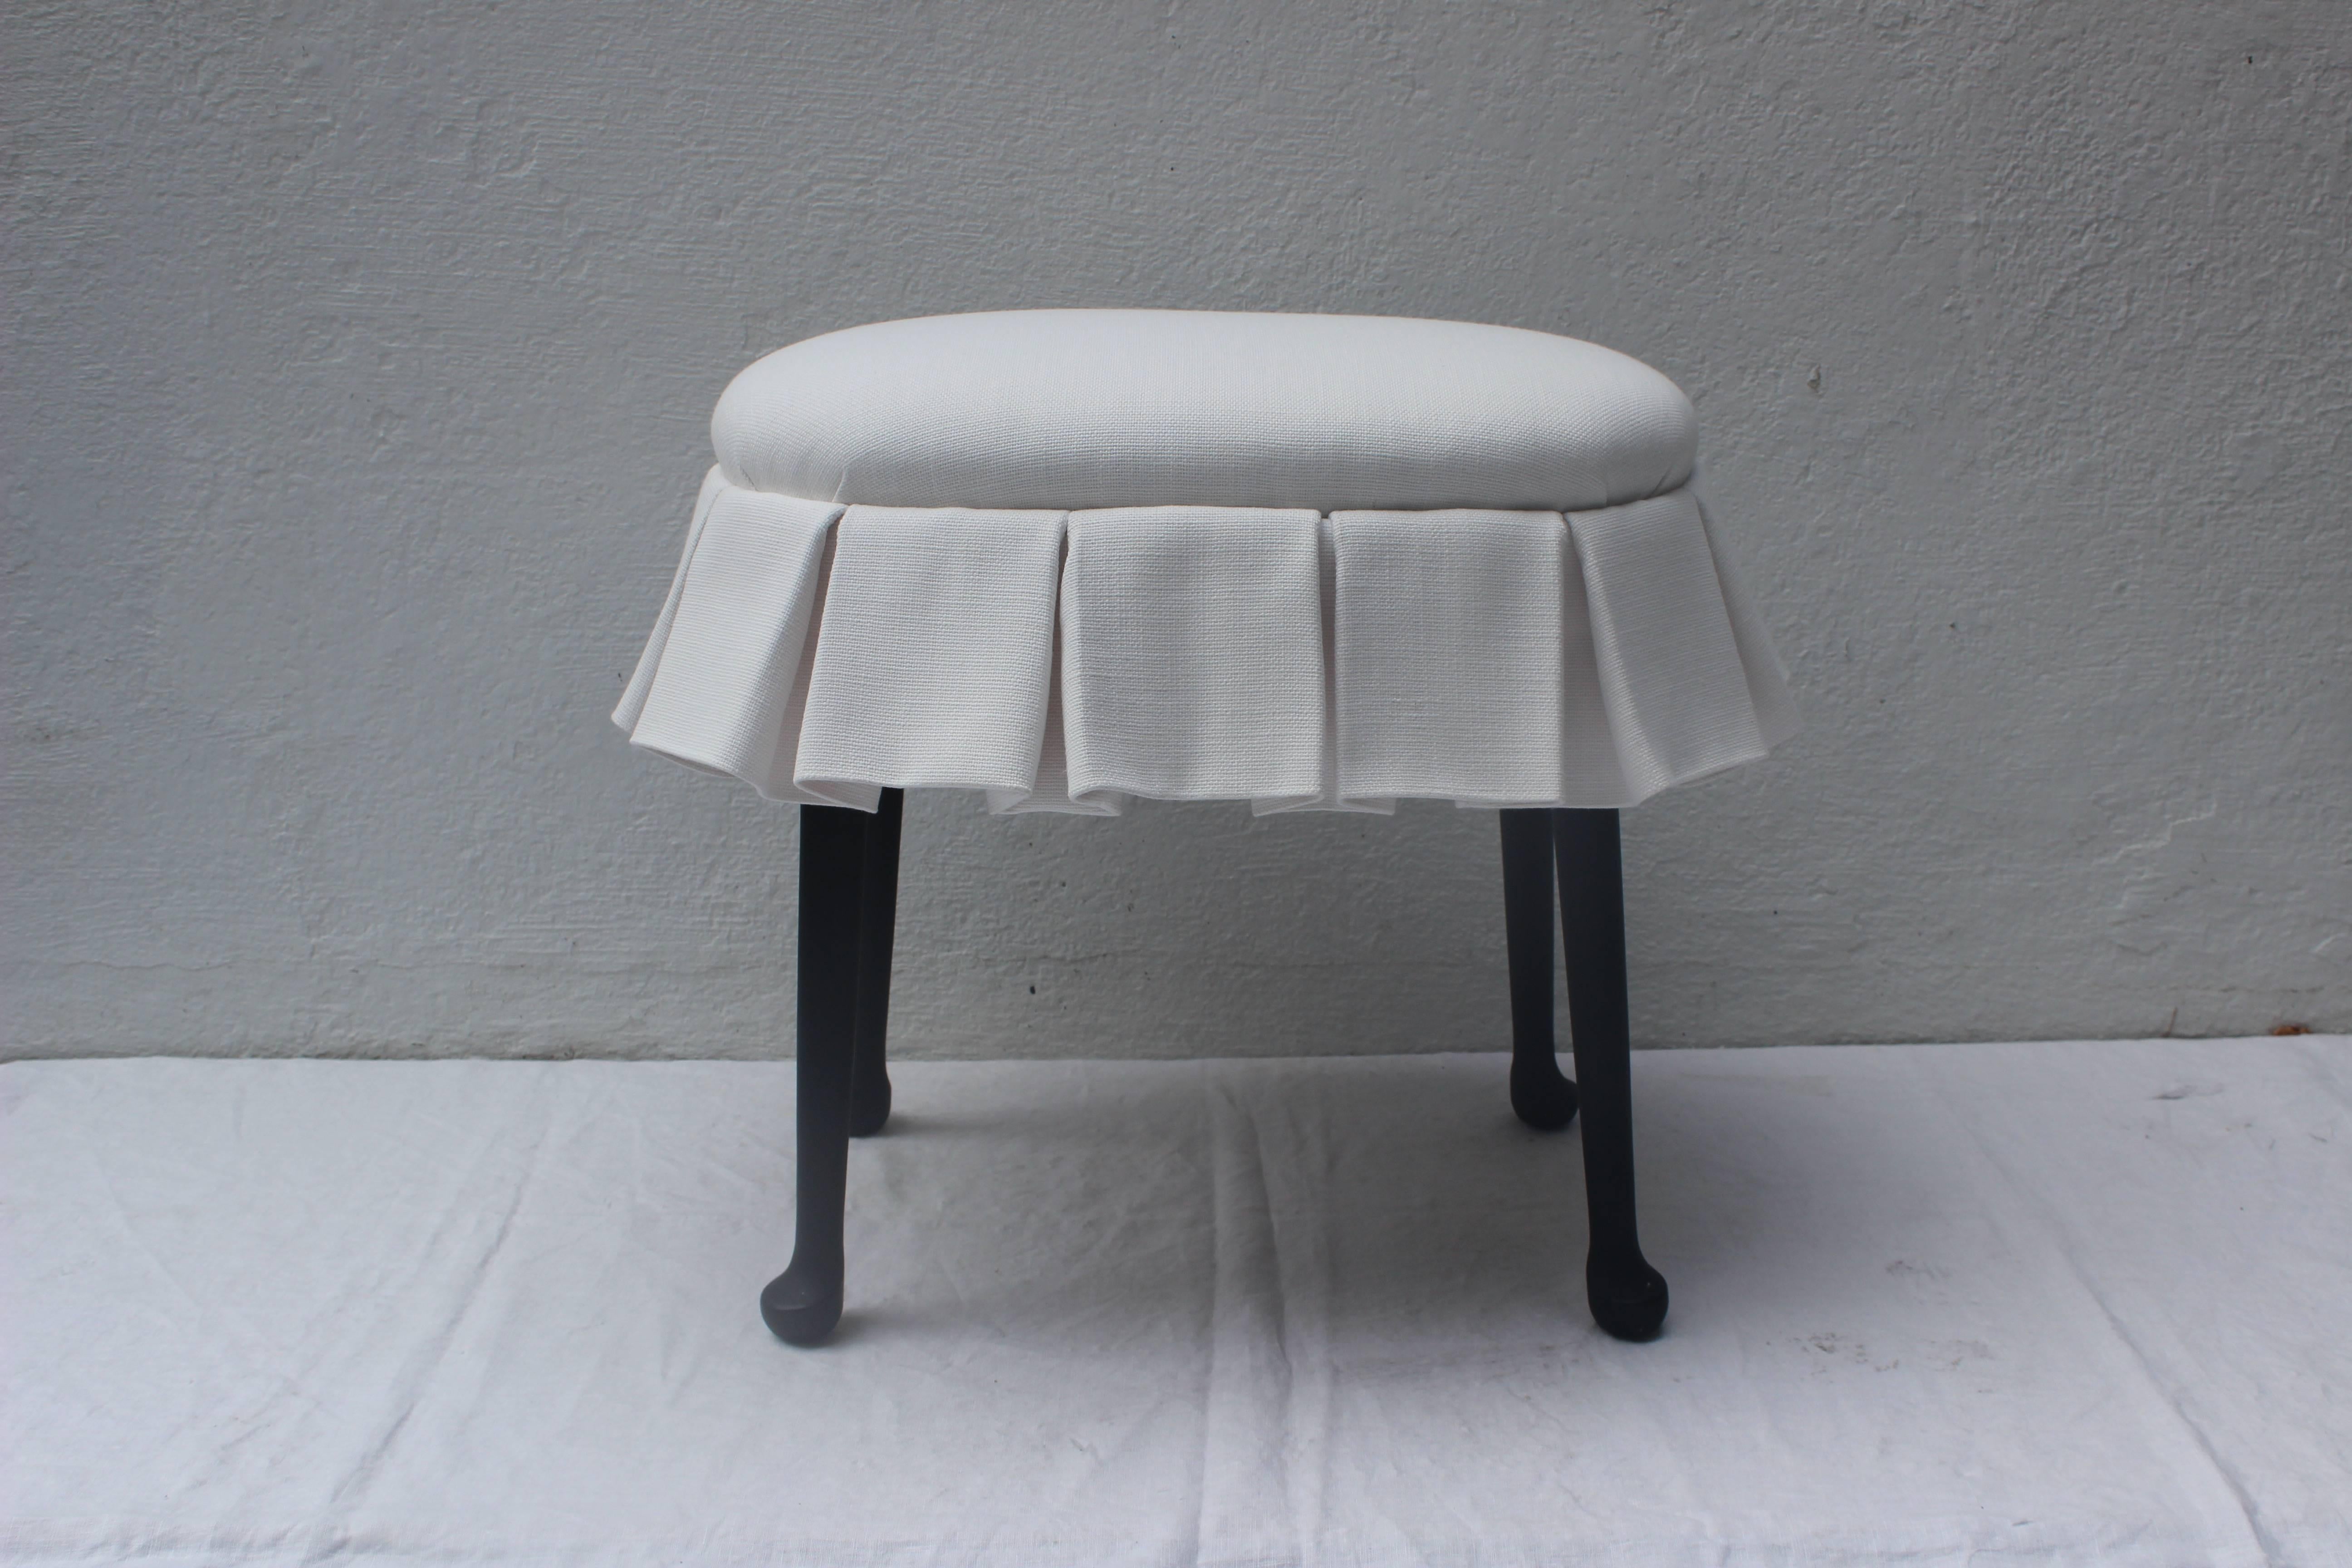 Fabulous oval stool with box pleated skirt upholstered in Perennials outdoor fabric. Ebonized wooden legs.